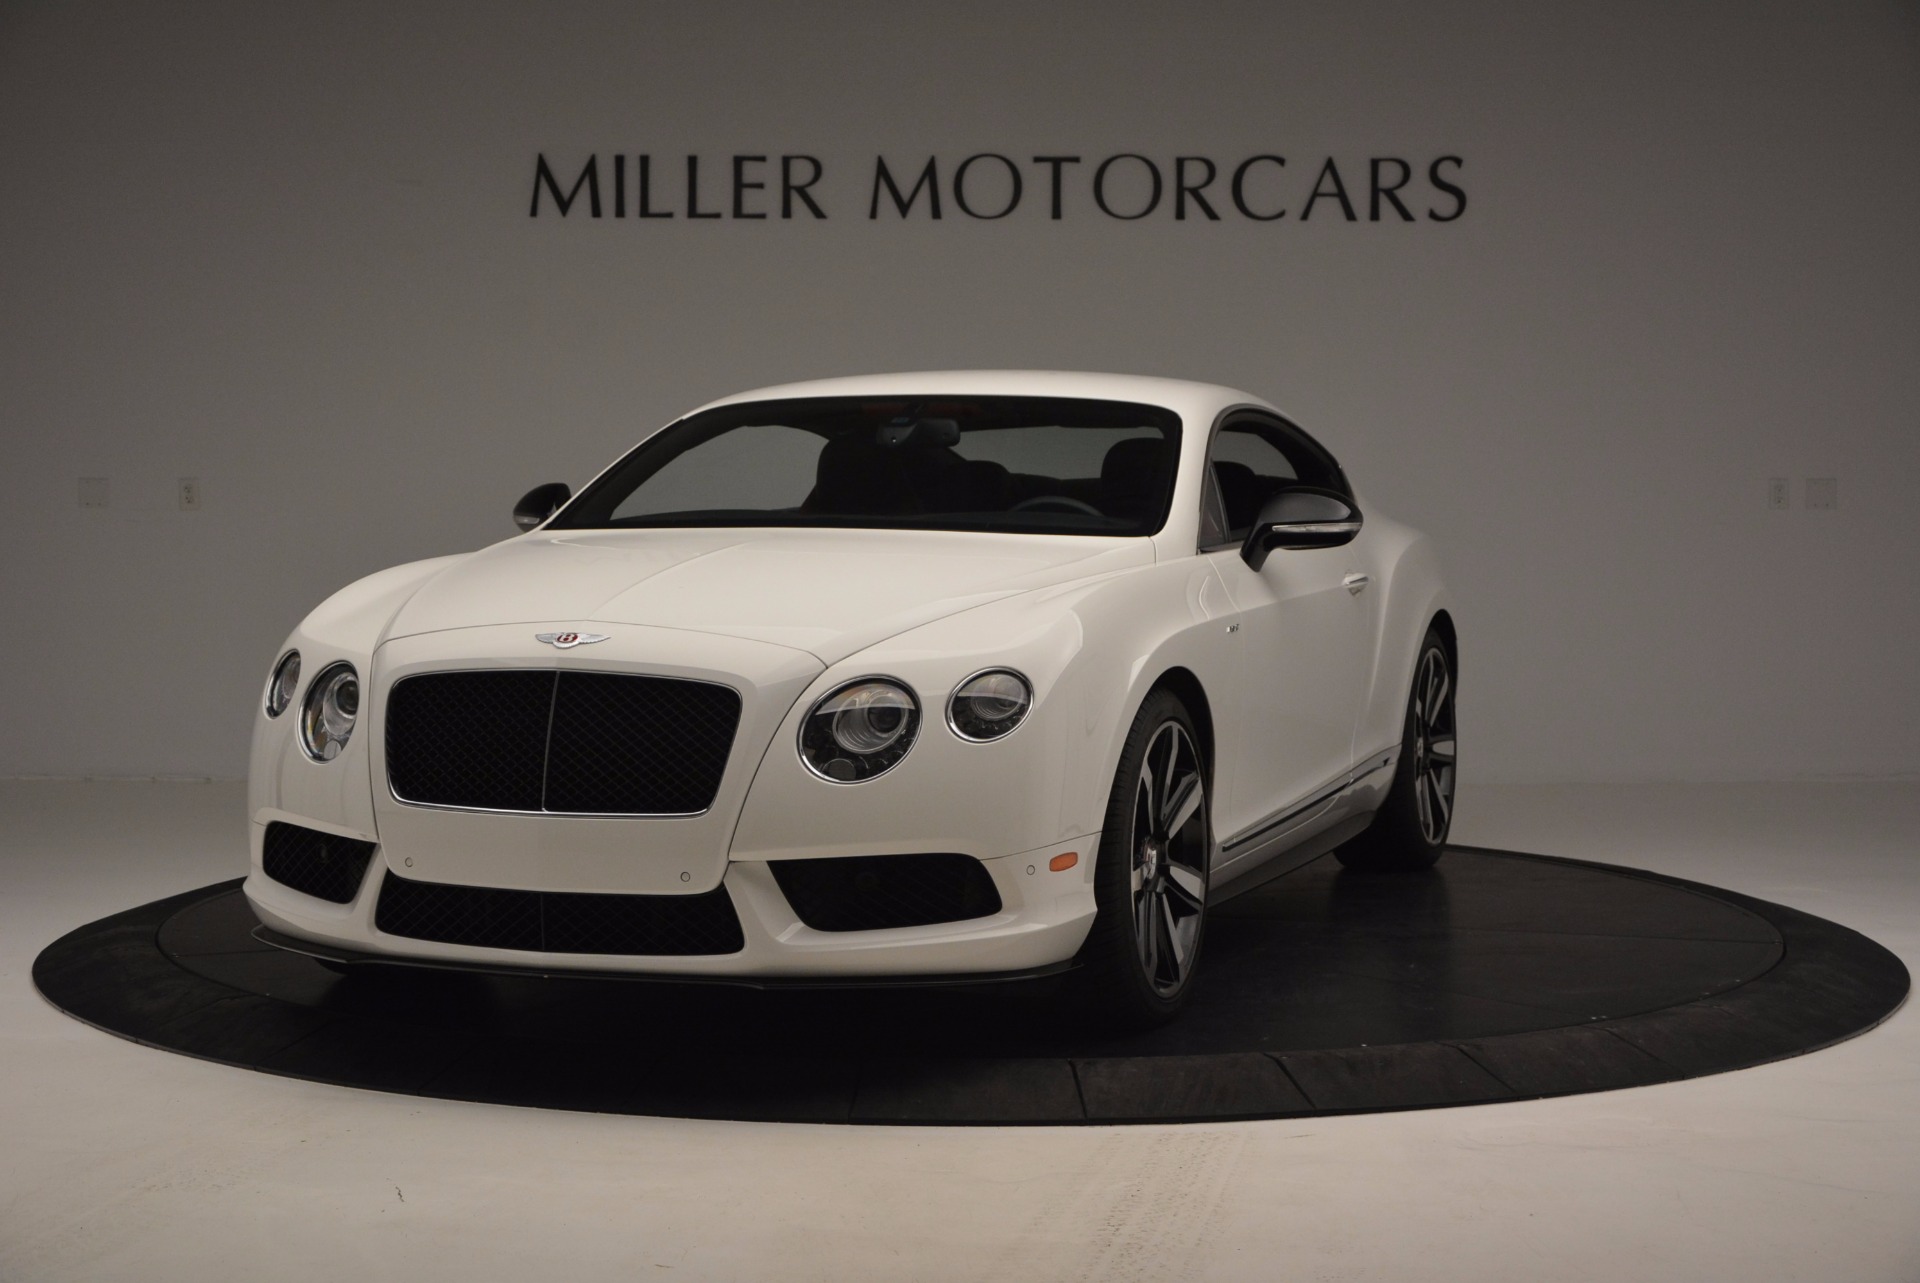 Used 2014 Bentley Continental GT V8 S for sale Sold at Maserati of Greenwich in Greenwich CT 06830 1